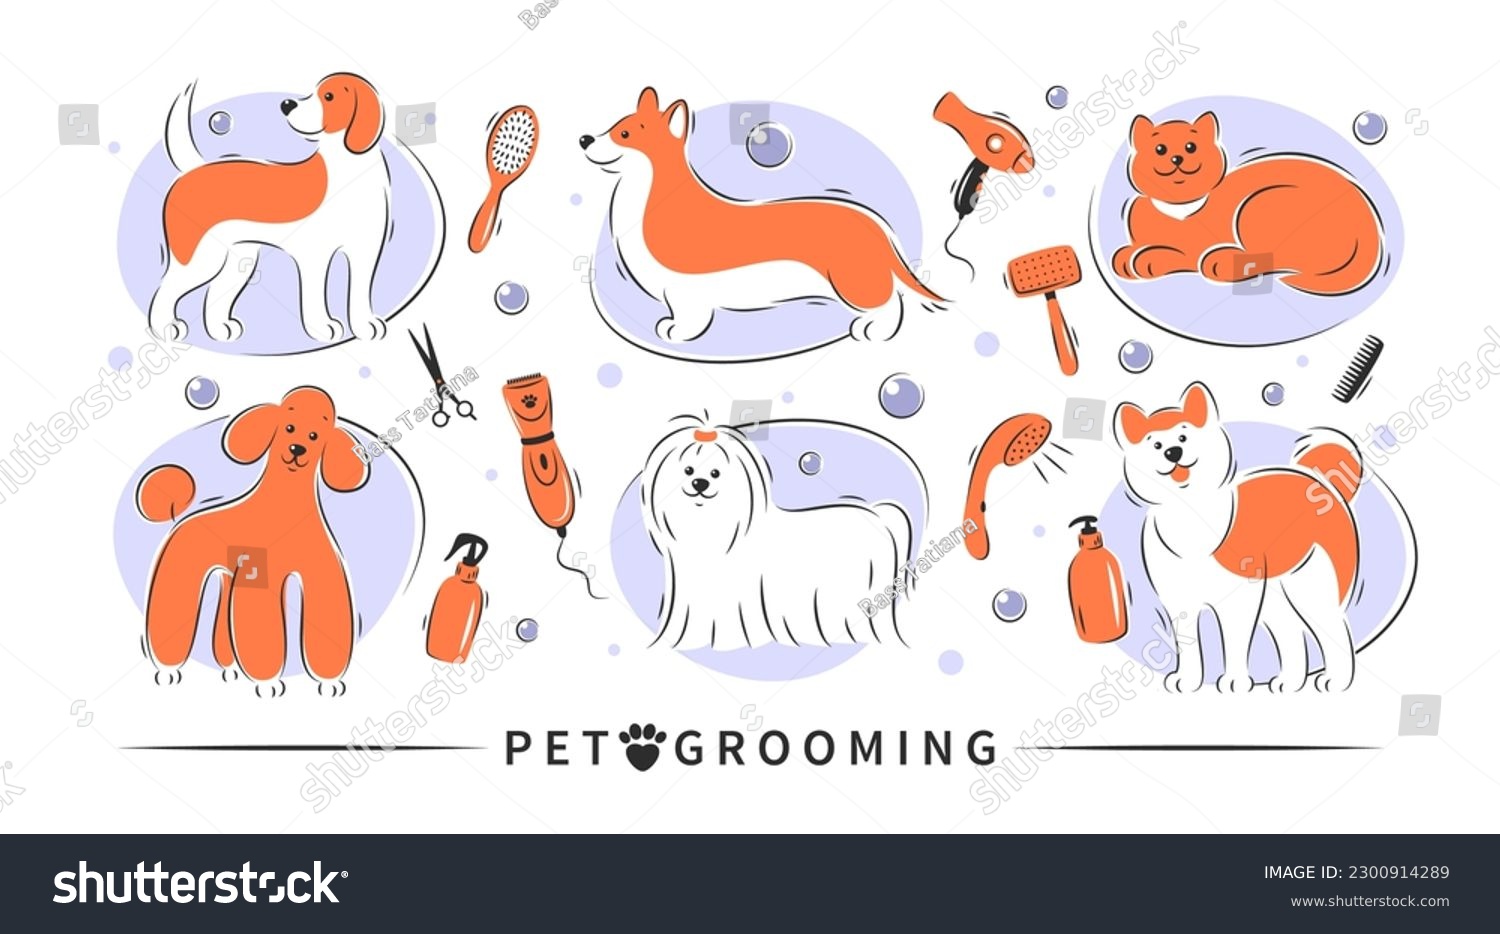 SVG of Pet grooming. Dog and cat beauty grooming salon, haircuts, bathing, care hair of pet. Vector illustration.
 svg